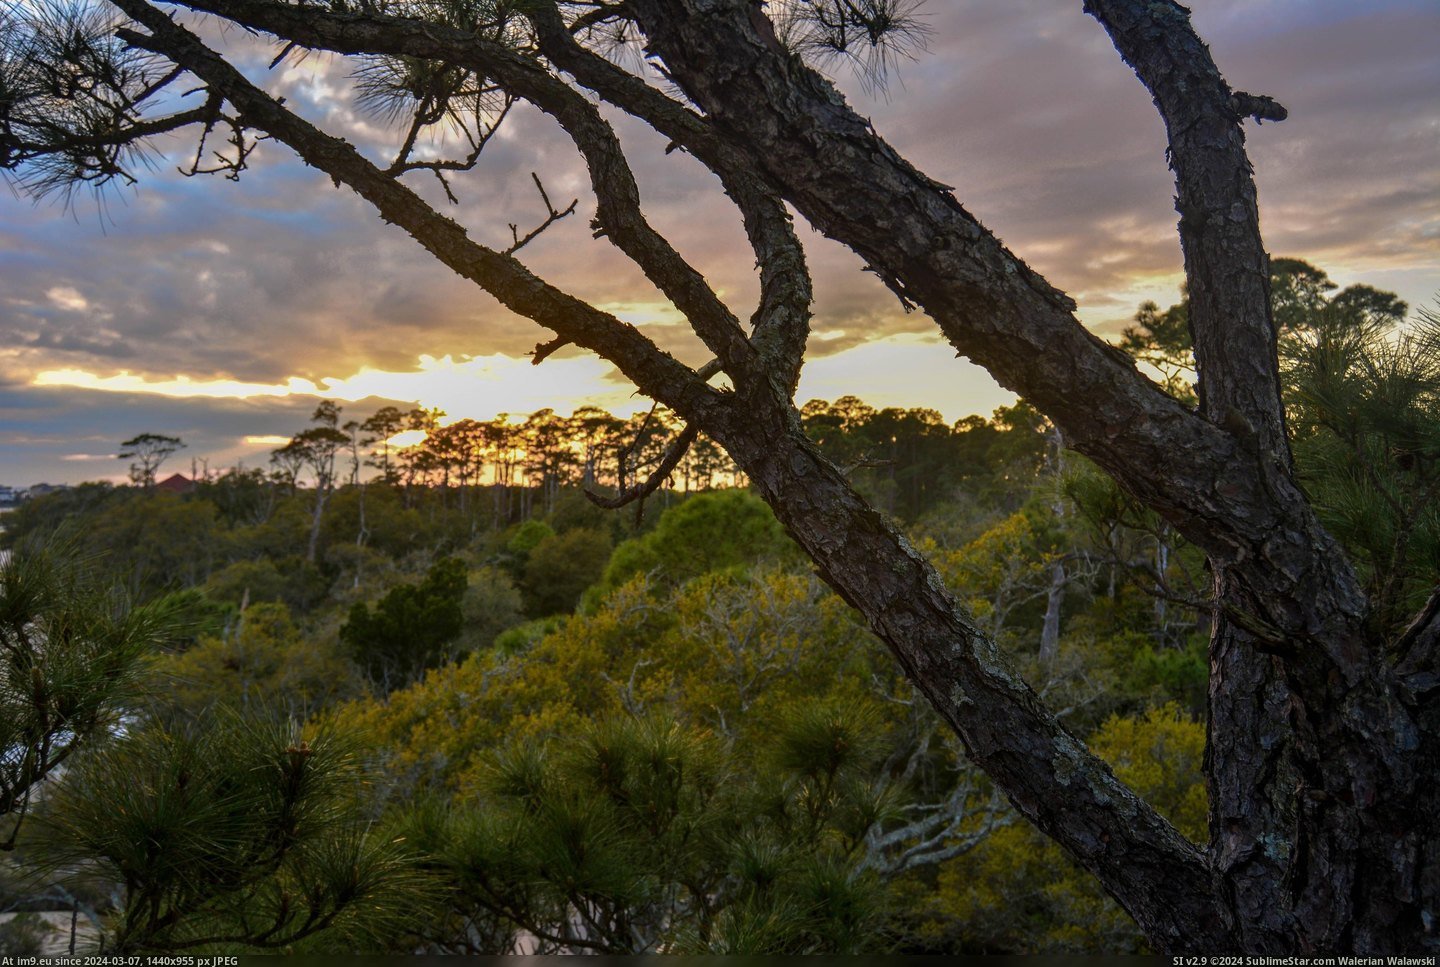 #Feet #Sunset #6000x4000 #Overlooking #Pensacola #Trees #Florida [Earthporn] Around 30 feet up in the trees, overlooking the sunset in Pensacola, Florida. [6000x4000] Pic. (Obraz z album My r/EARTHPORN favs))